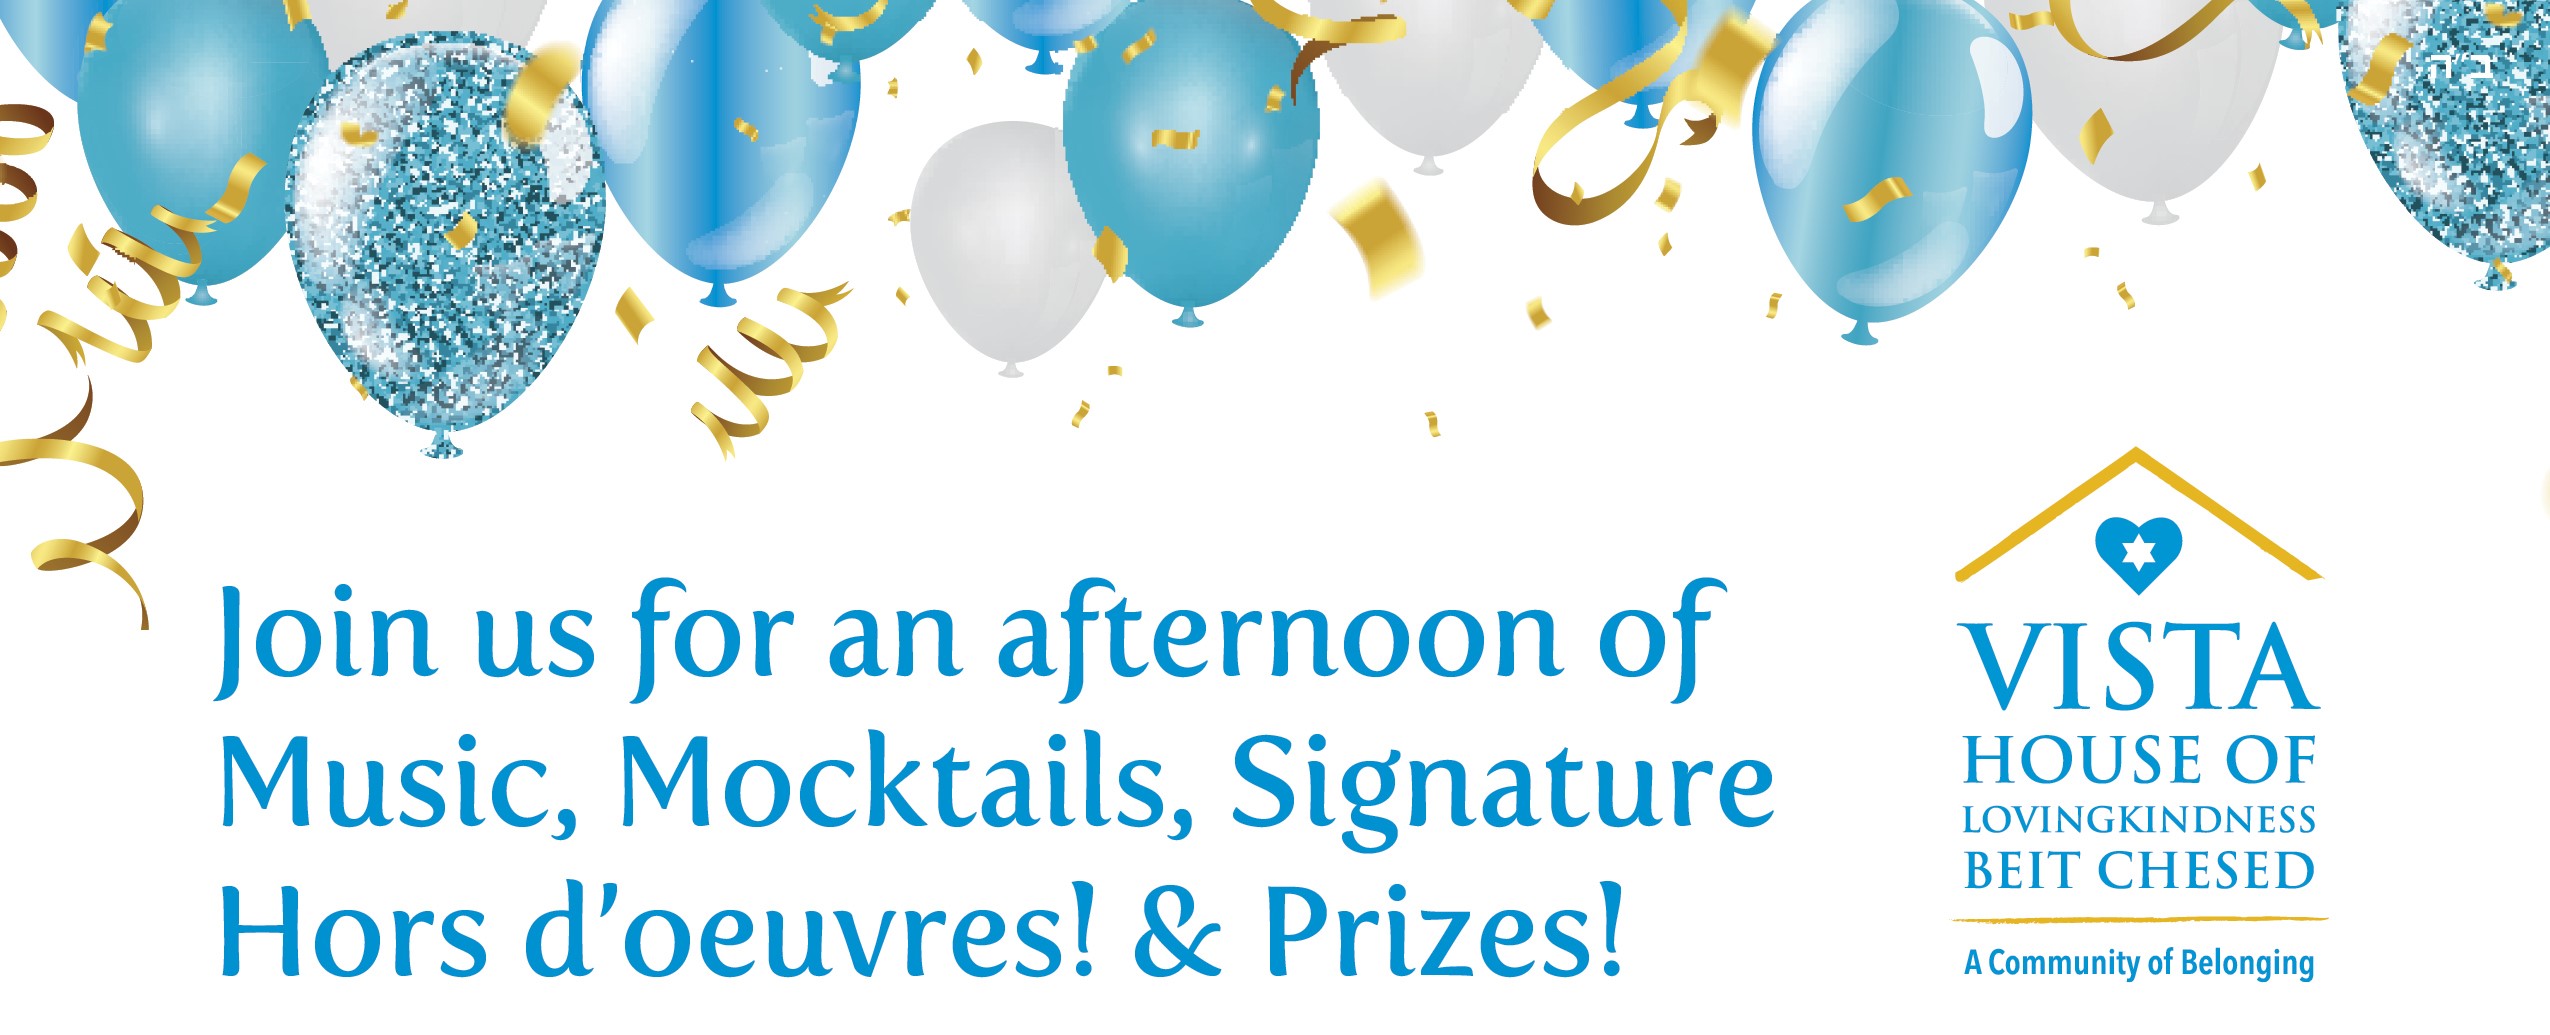 Join us for an afternoon of Music, Mocktails, Signature Hors d'oeuvres! & Prizes!